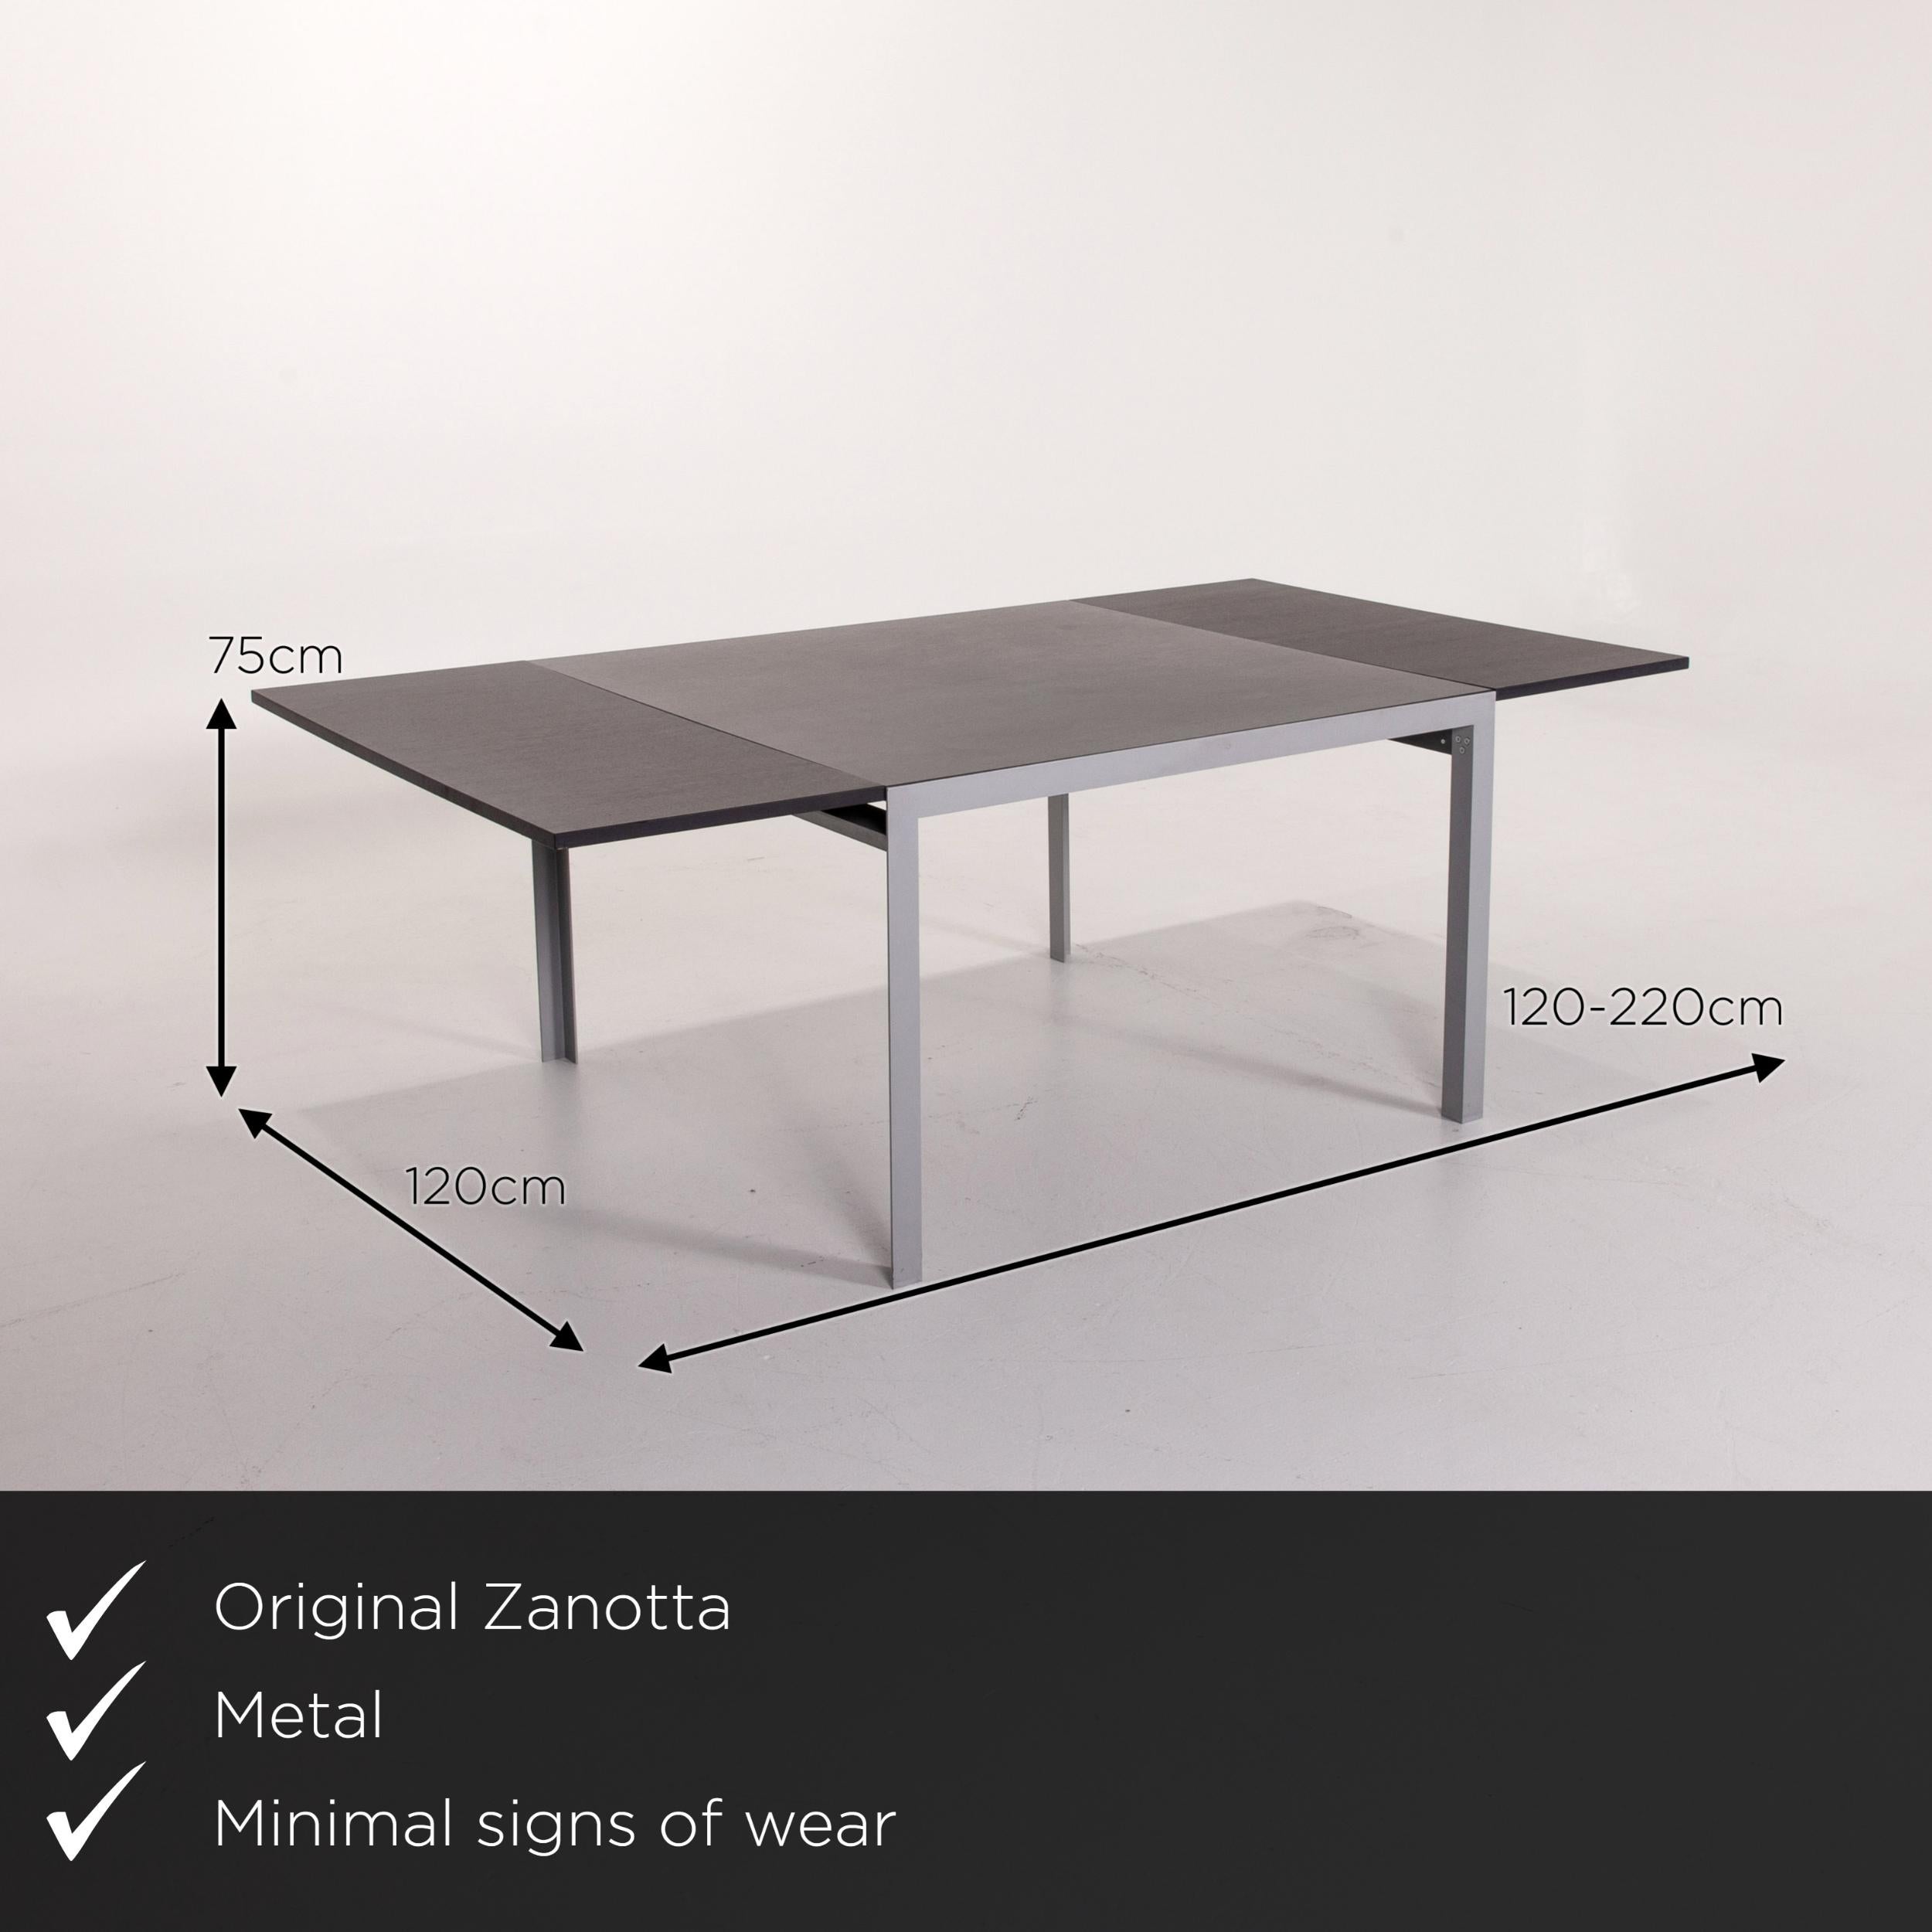 We present to you a Zanotta Estenso metal dining table wood brown folding table function.

 

 Product measurements in centimeters:
 

Depth 120
Width 120
Height 75.





     